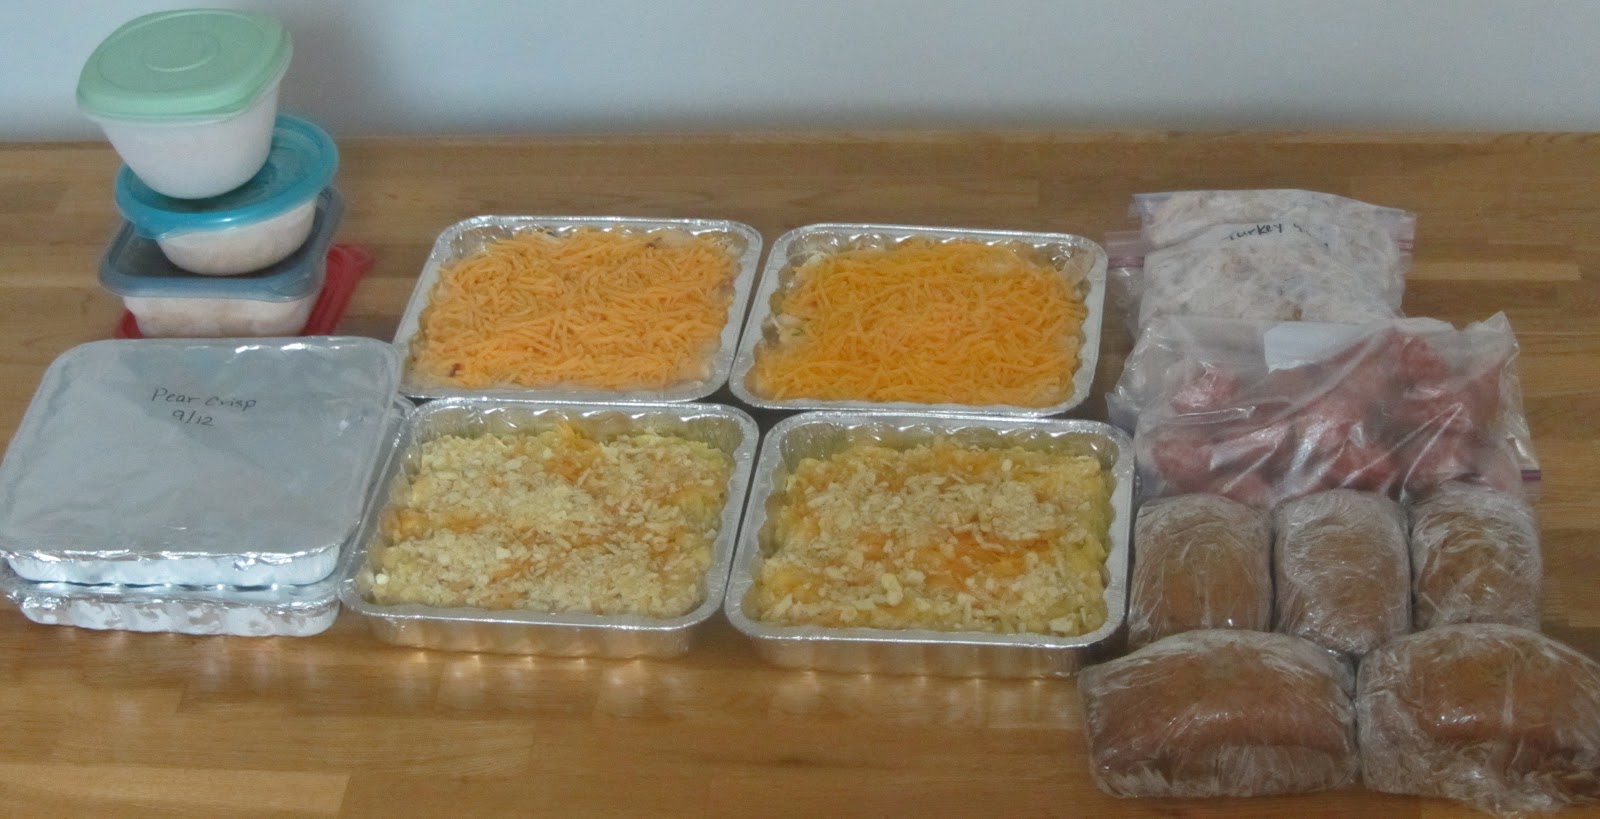 Been There Baked That: Recent Freezer Meals